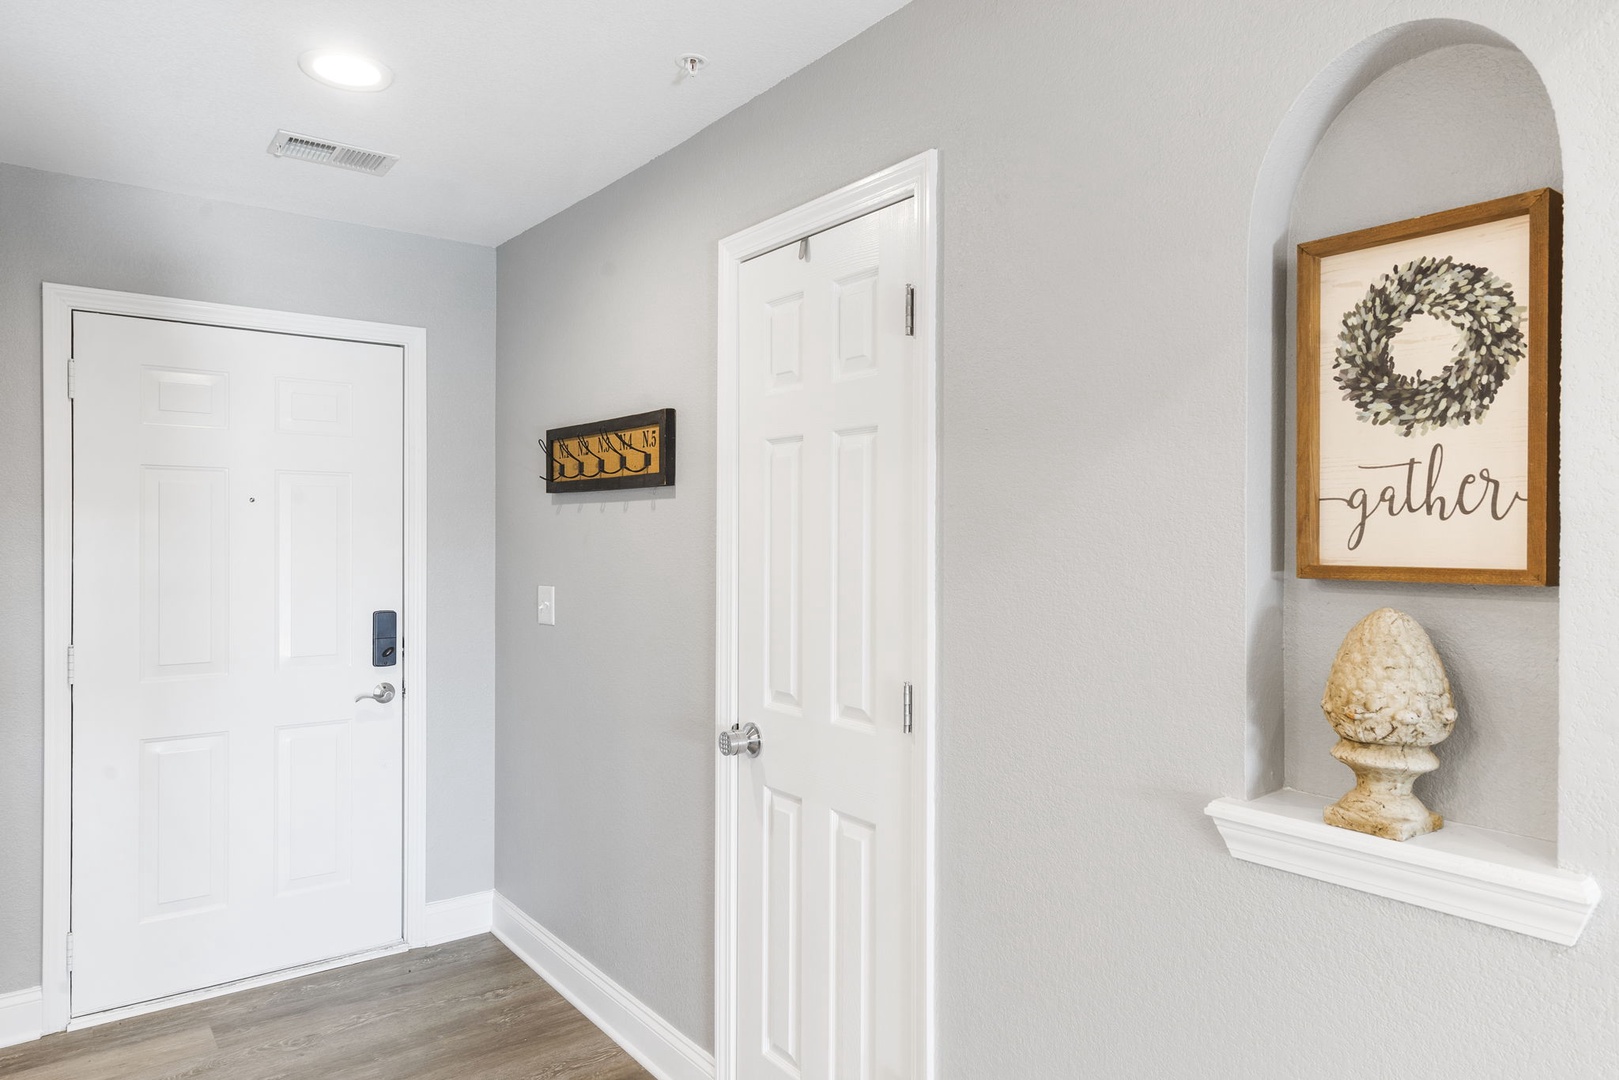 Unit 20: A bright, cheerful entryway will welcome you home